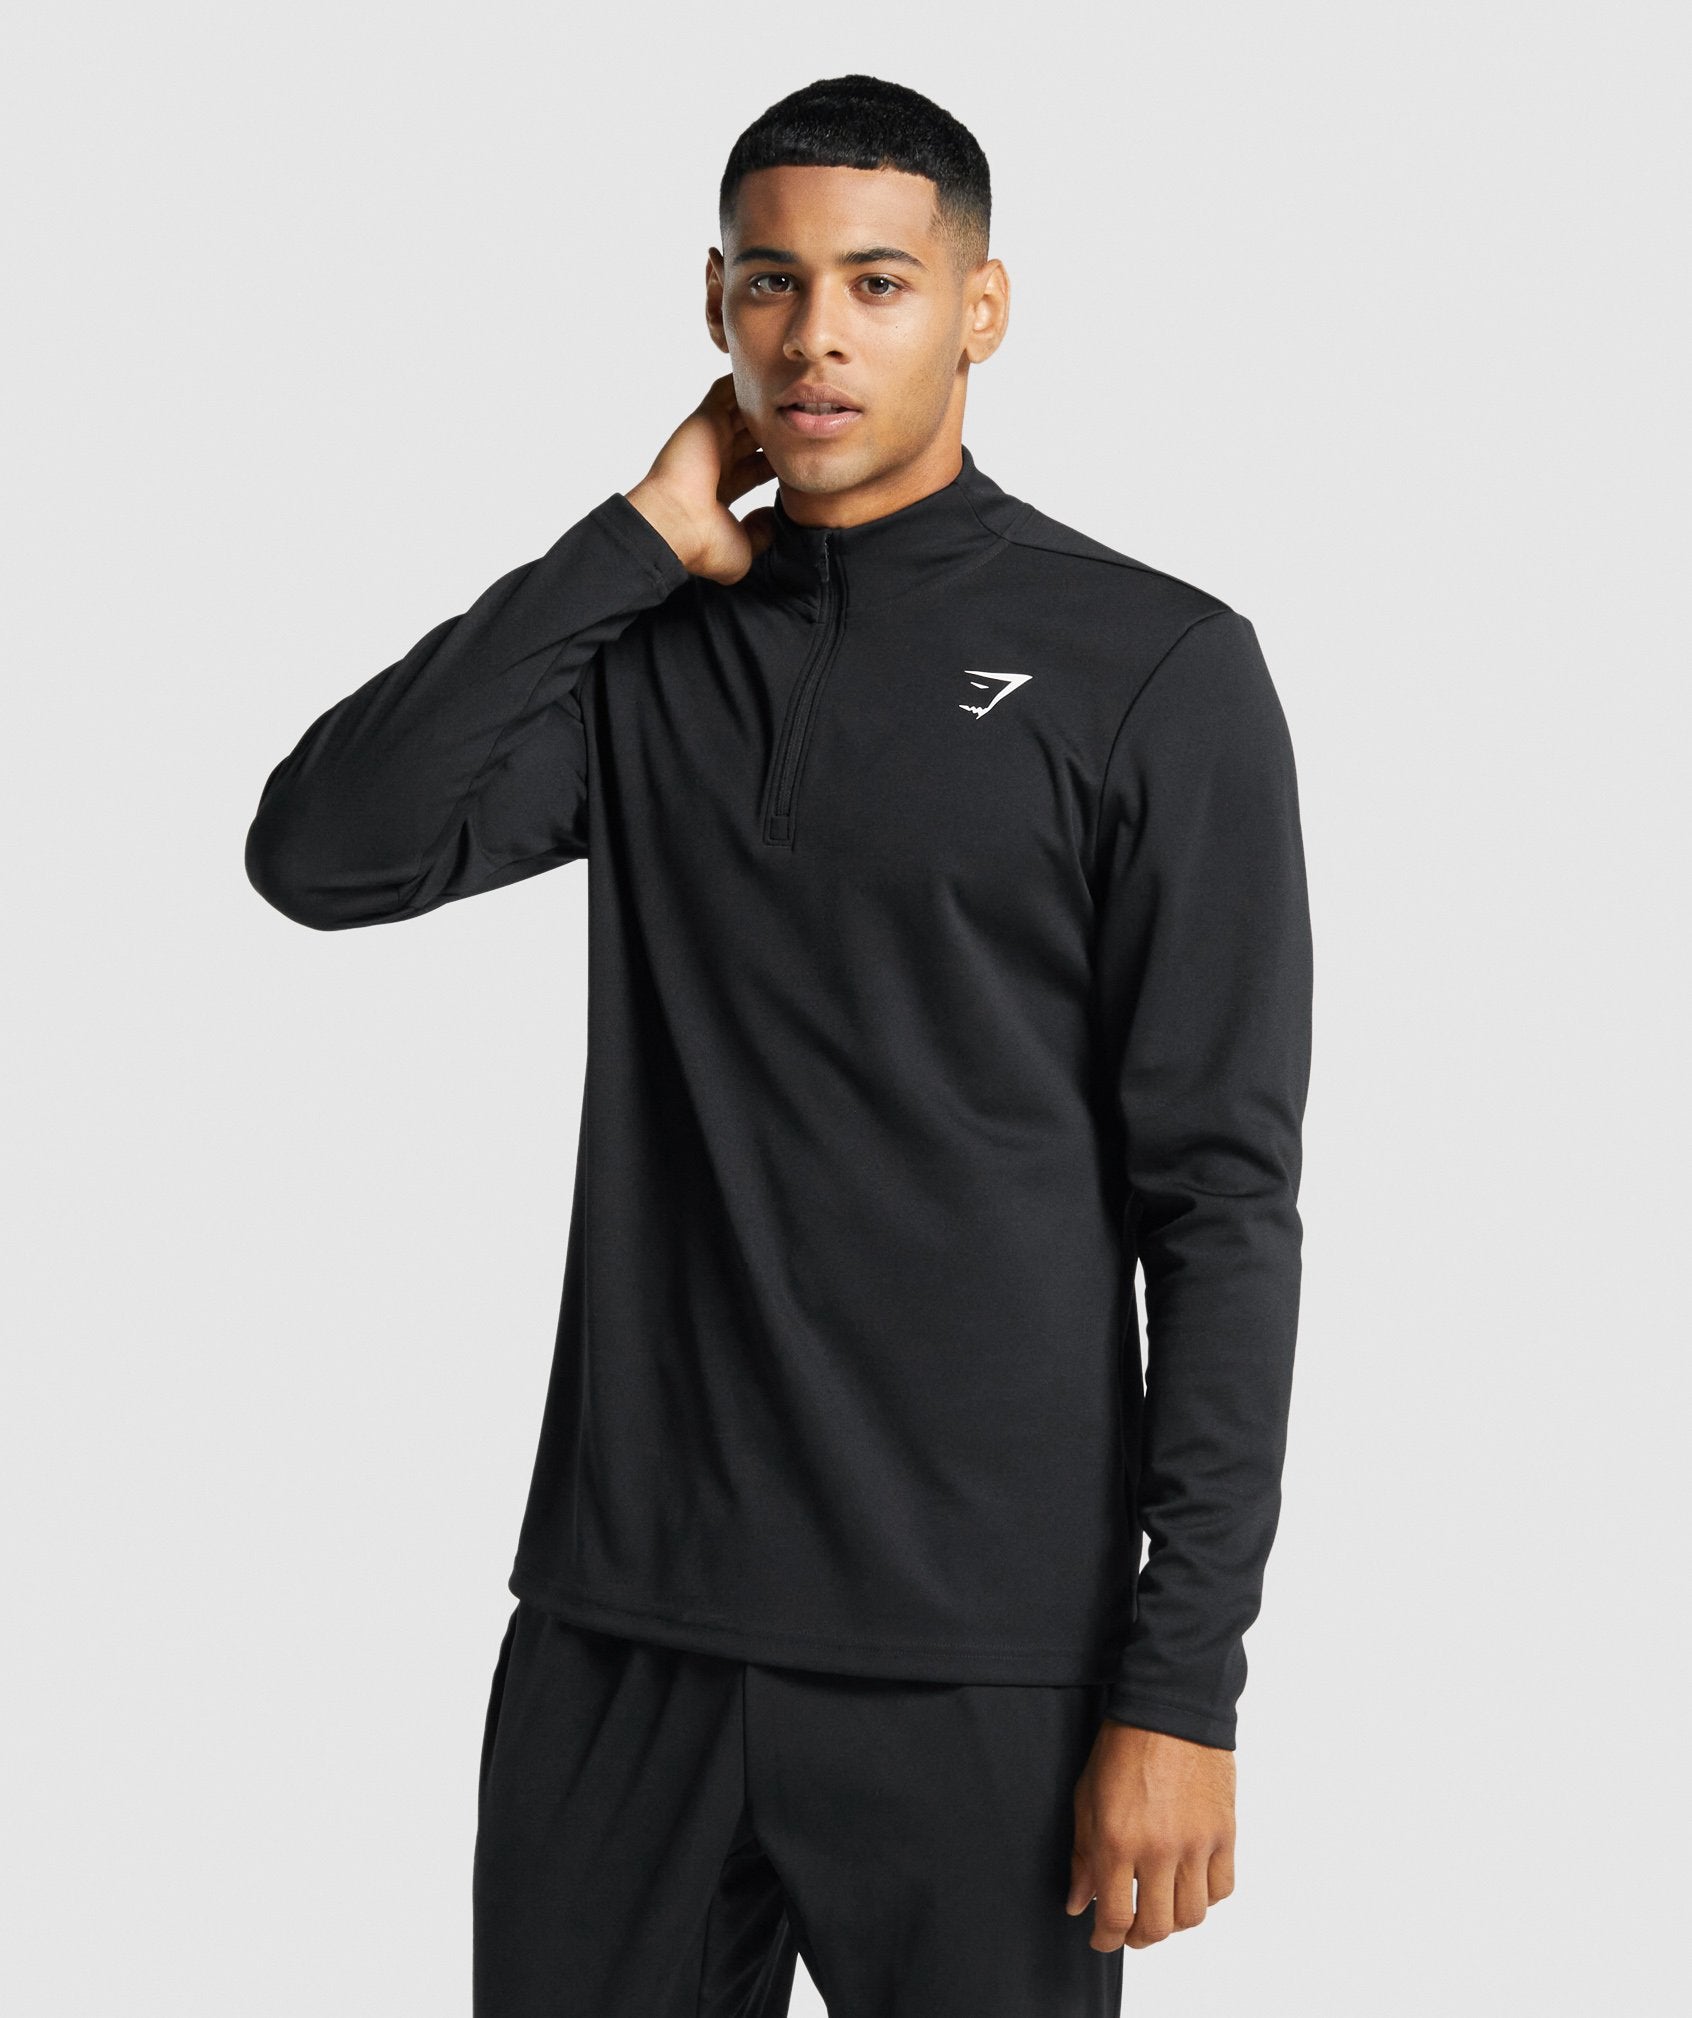 Products - Tagged Brand GymShark - Page 4